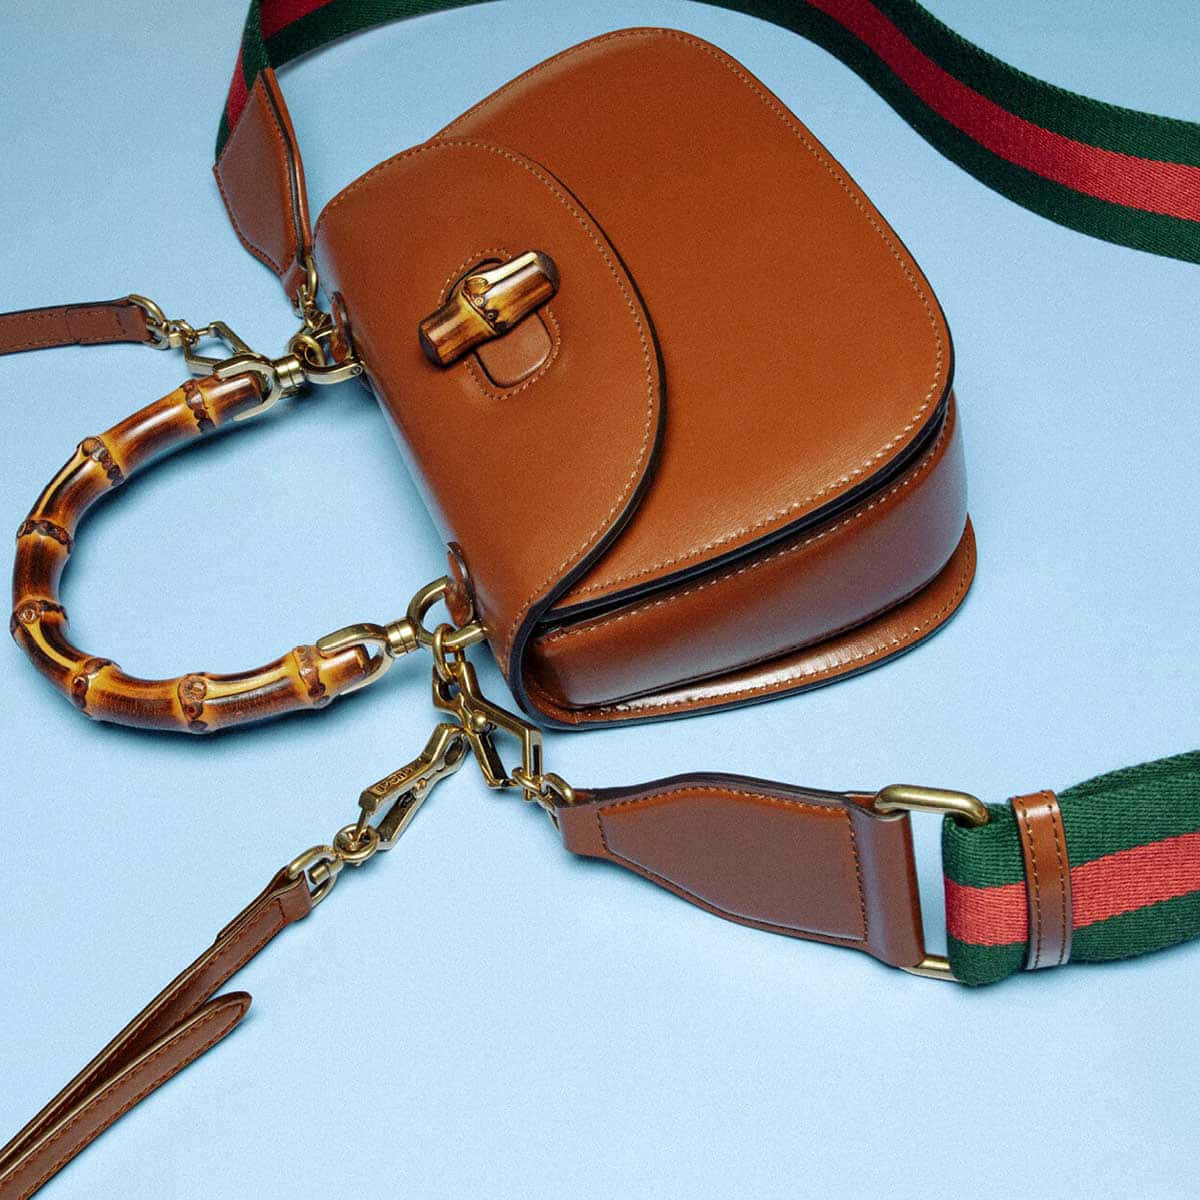 Discover Luxury with Gucci